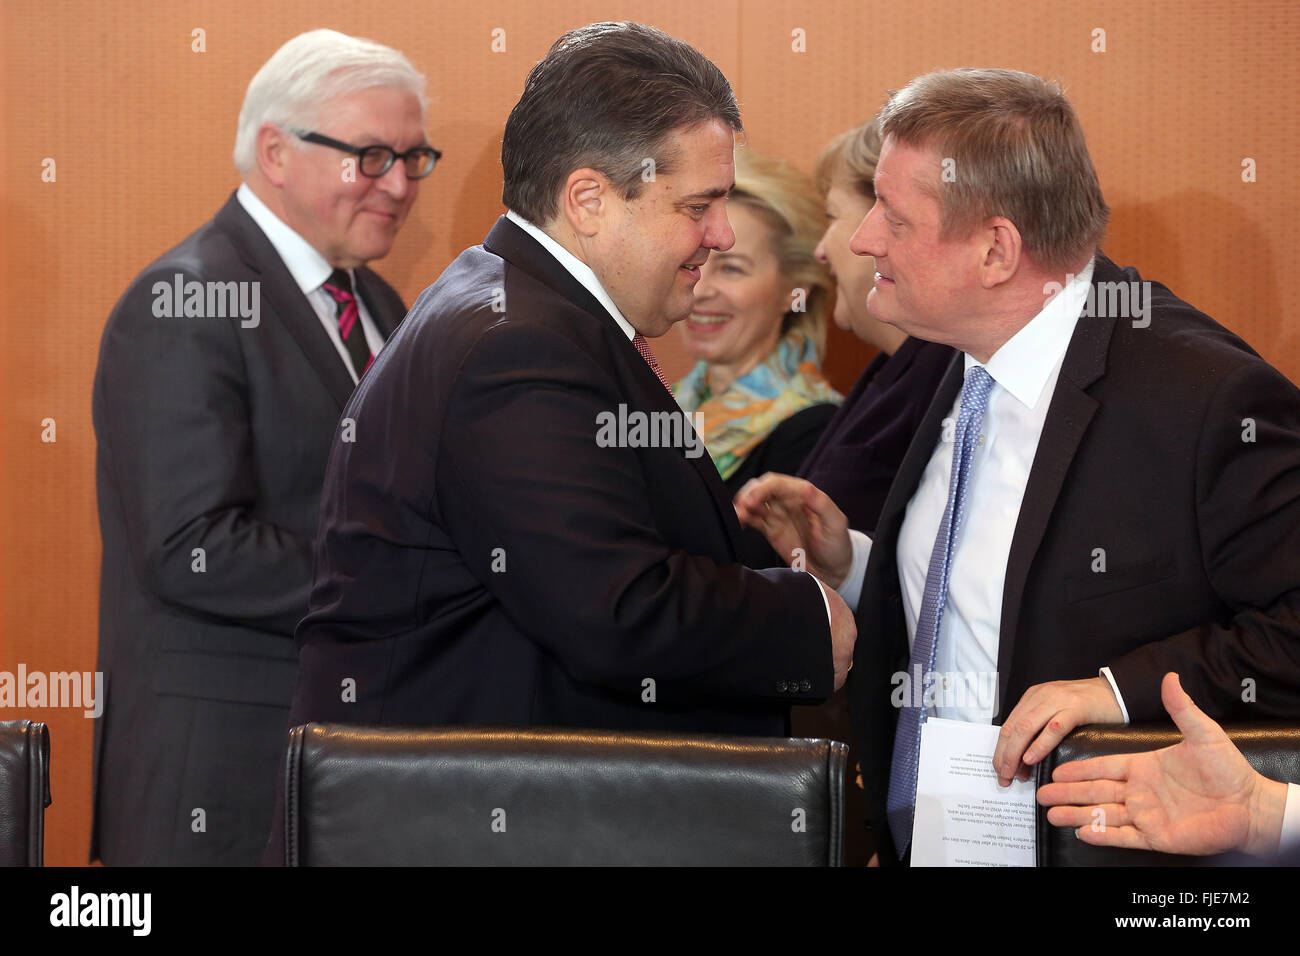 Berlin, Germany. 02nd Mar, 2016. German Minister of Economic Affairs Sigmar Gabriel (L) and Minister of Health Hermann Groehe talk in front of Foreign Minister Frank-Walter Steinmeier (L-R), Defence Minister Ursula von der Leyen, and Chancellor Angela Merkel at the start of the federal cabinet meeting in Berlin, Germany, 02 March 2016. Photo: WOLFGANG KUMM/dpa/Alamy Live News Stock Photo